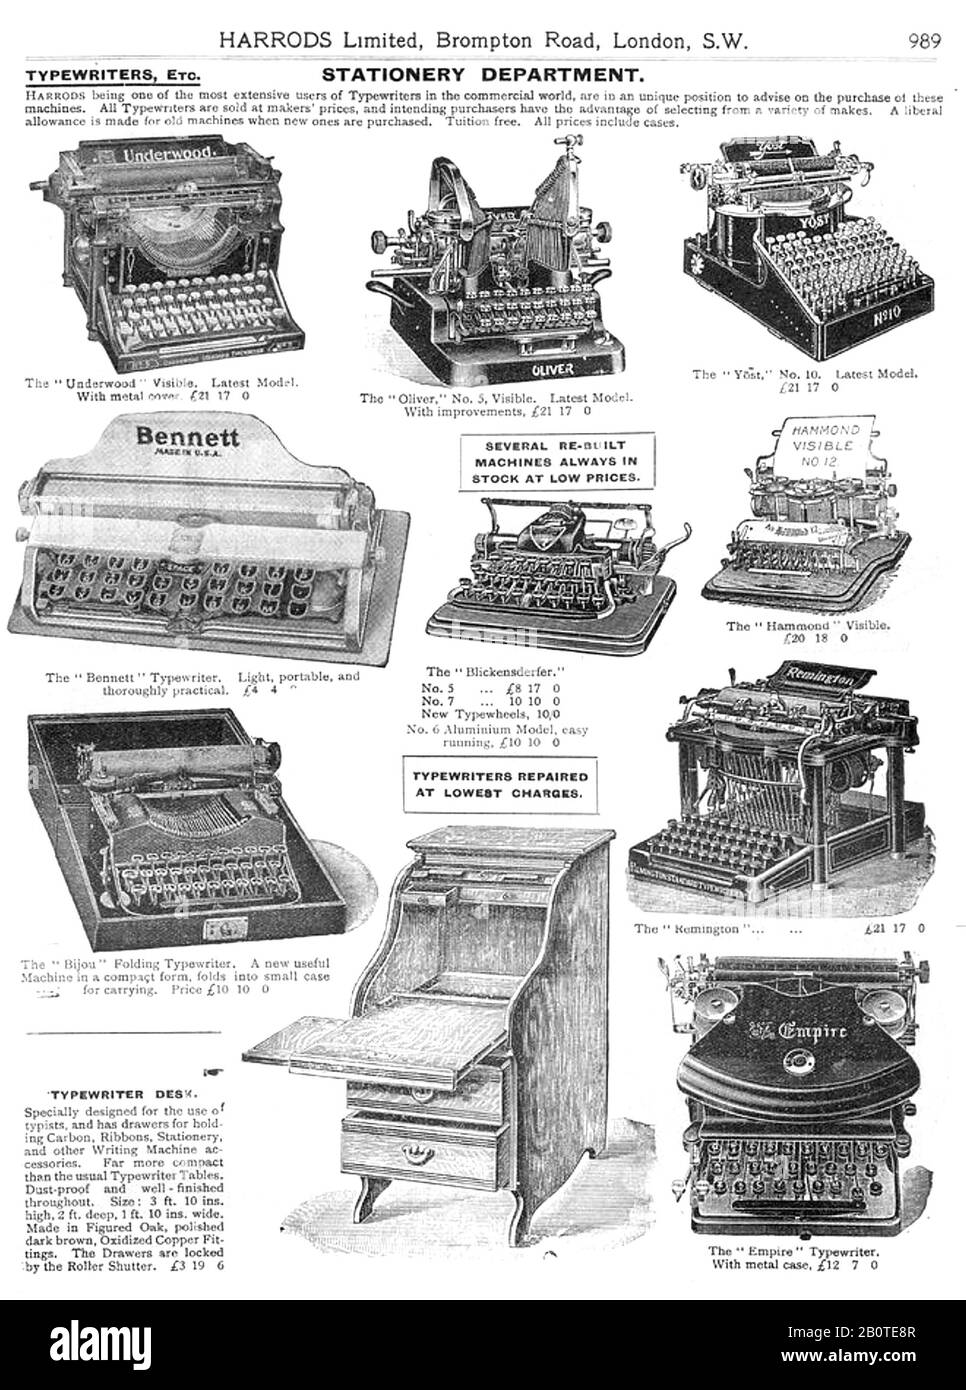 TYPEWRITERS in the Harrods catalogue for 1909 Stock Photo